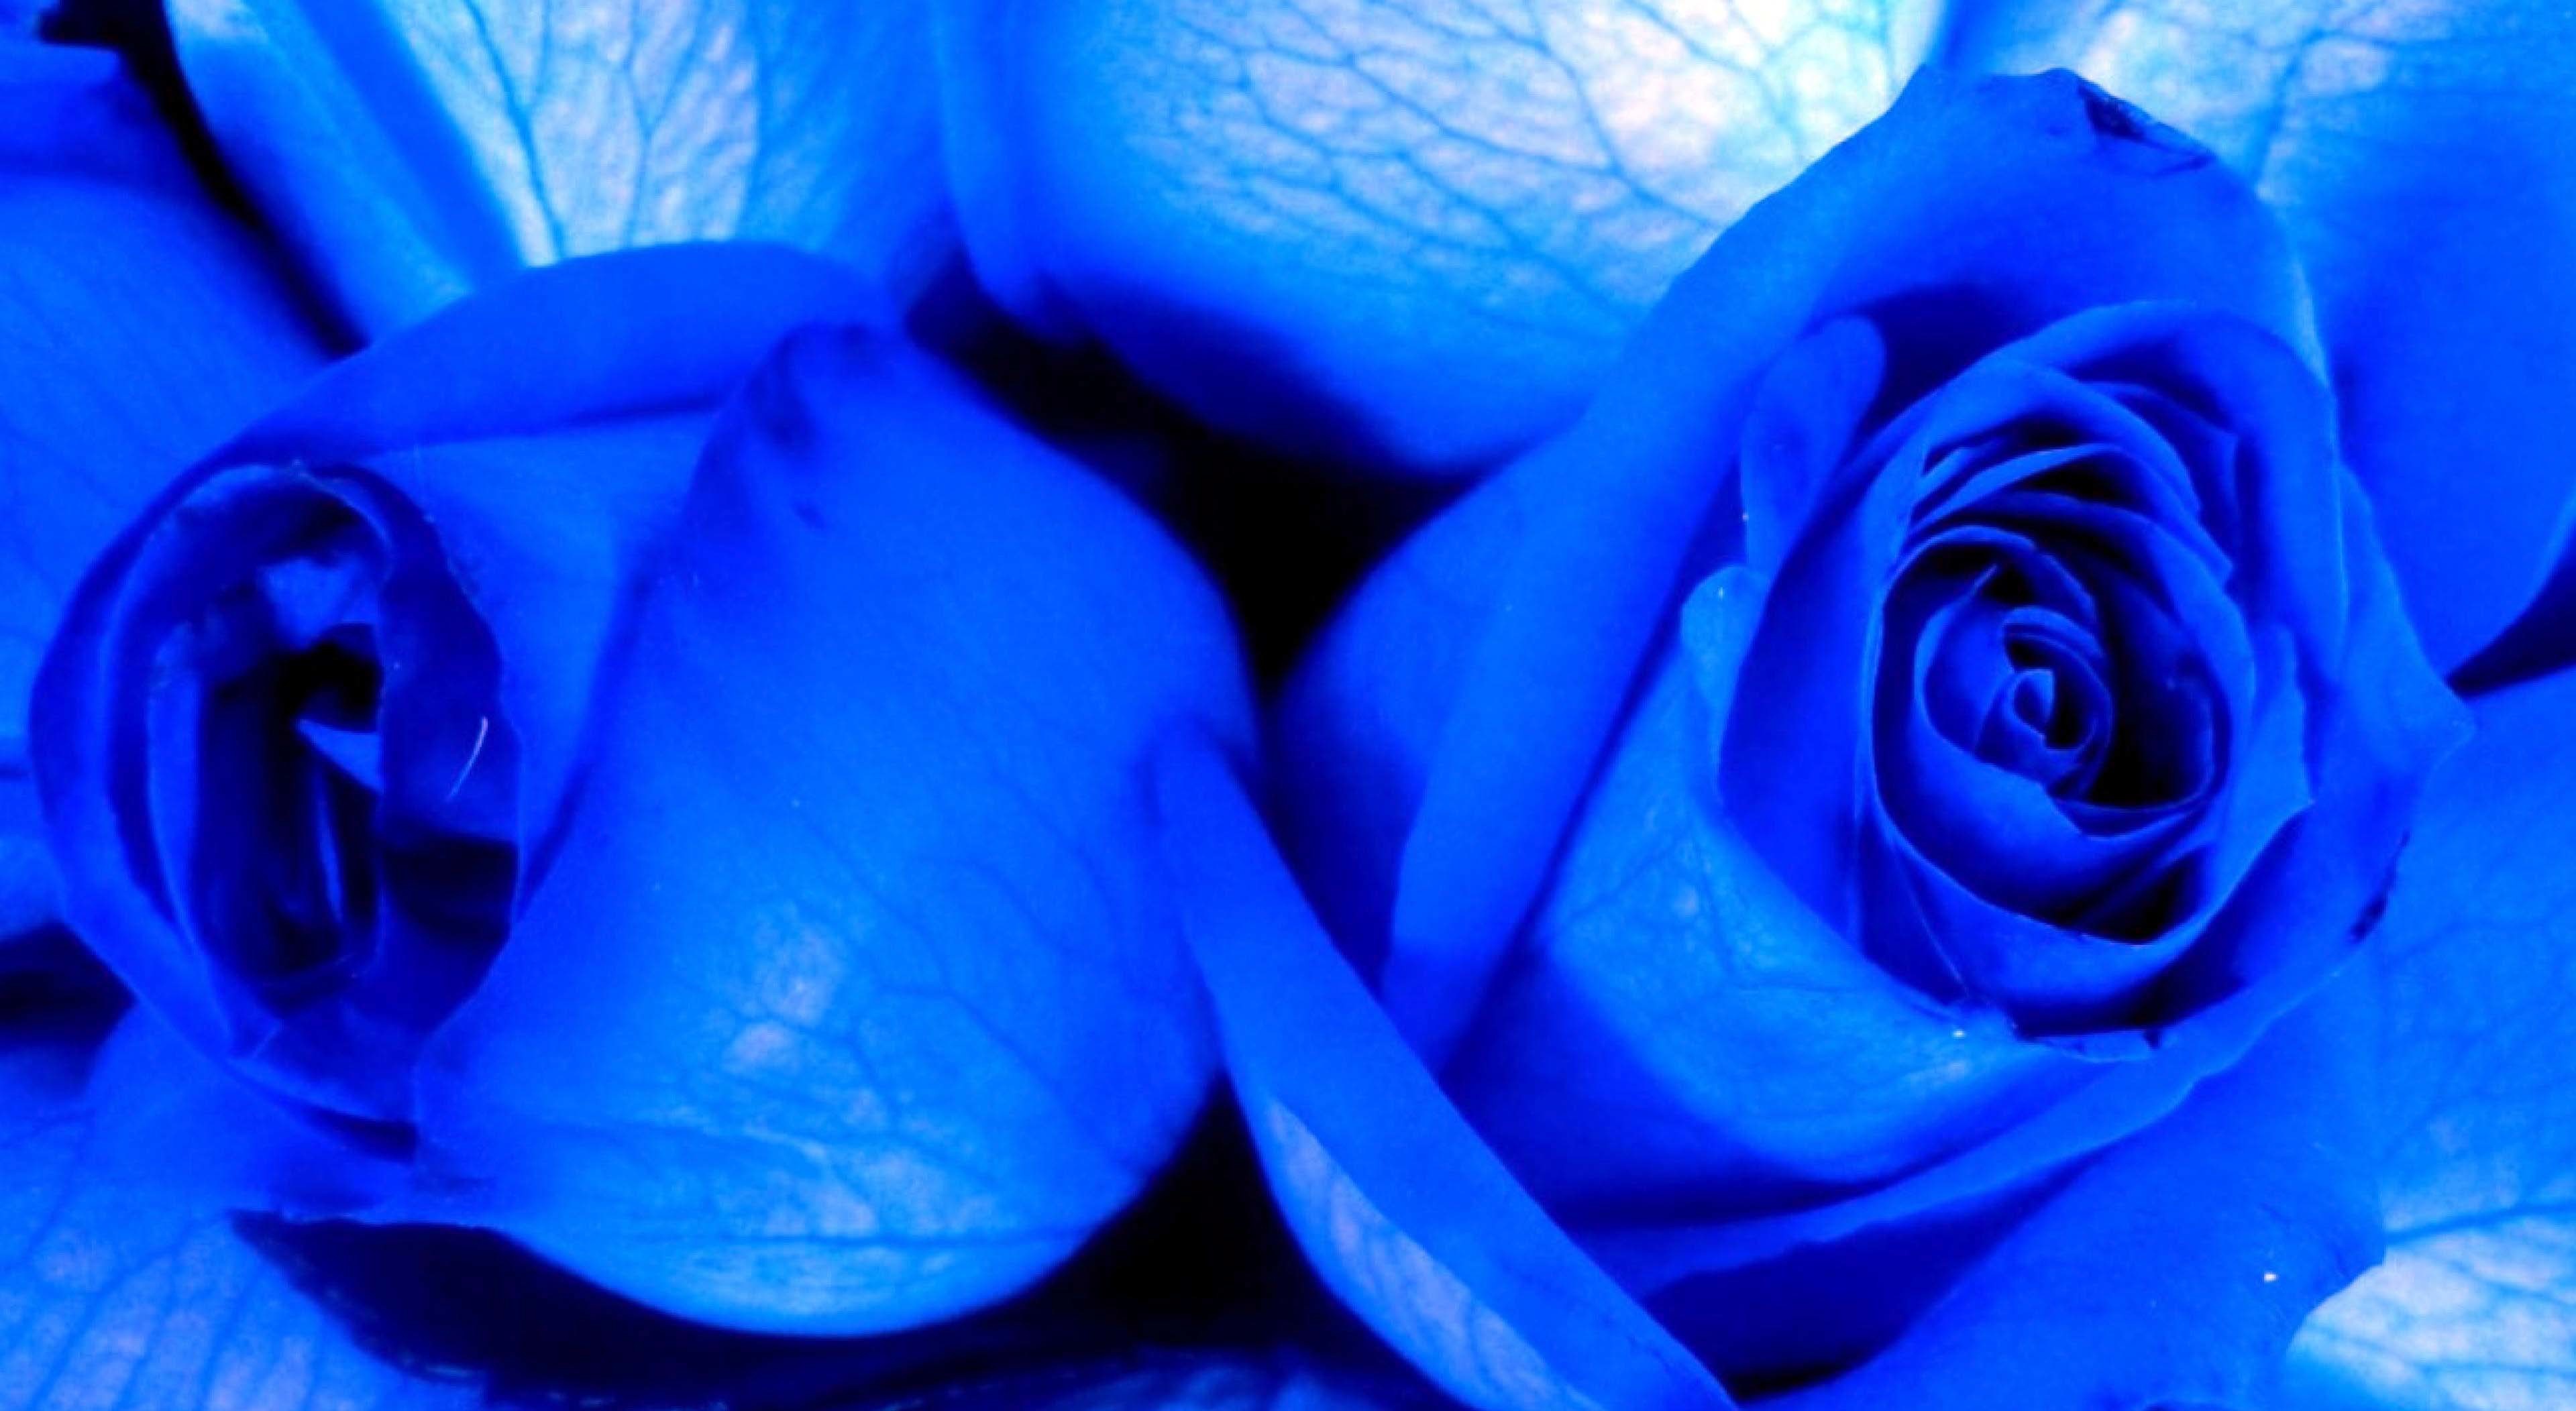 3840x2104 Blue roses black background are attractive and give a mysterious look. This  dark beauty in wallpapers is interesting to see.